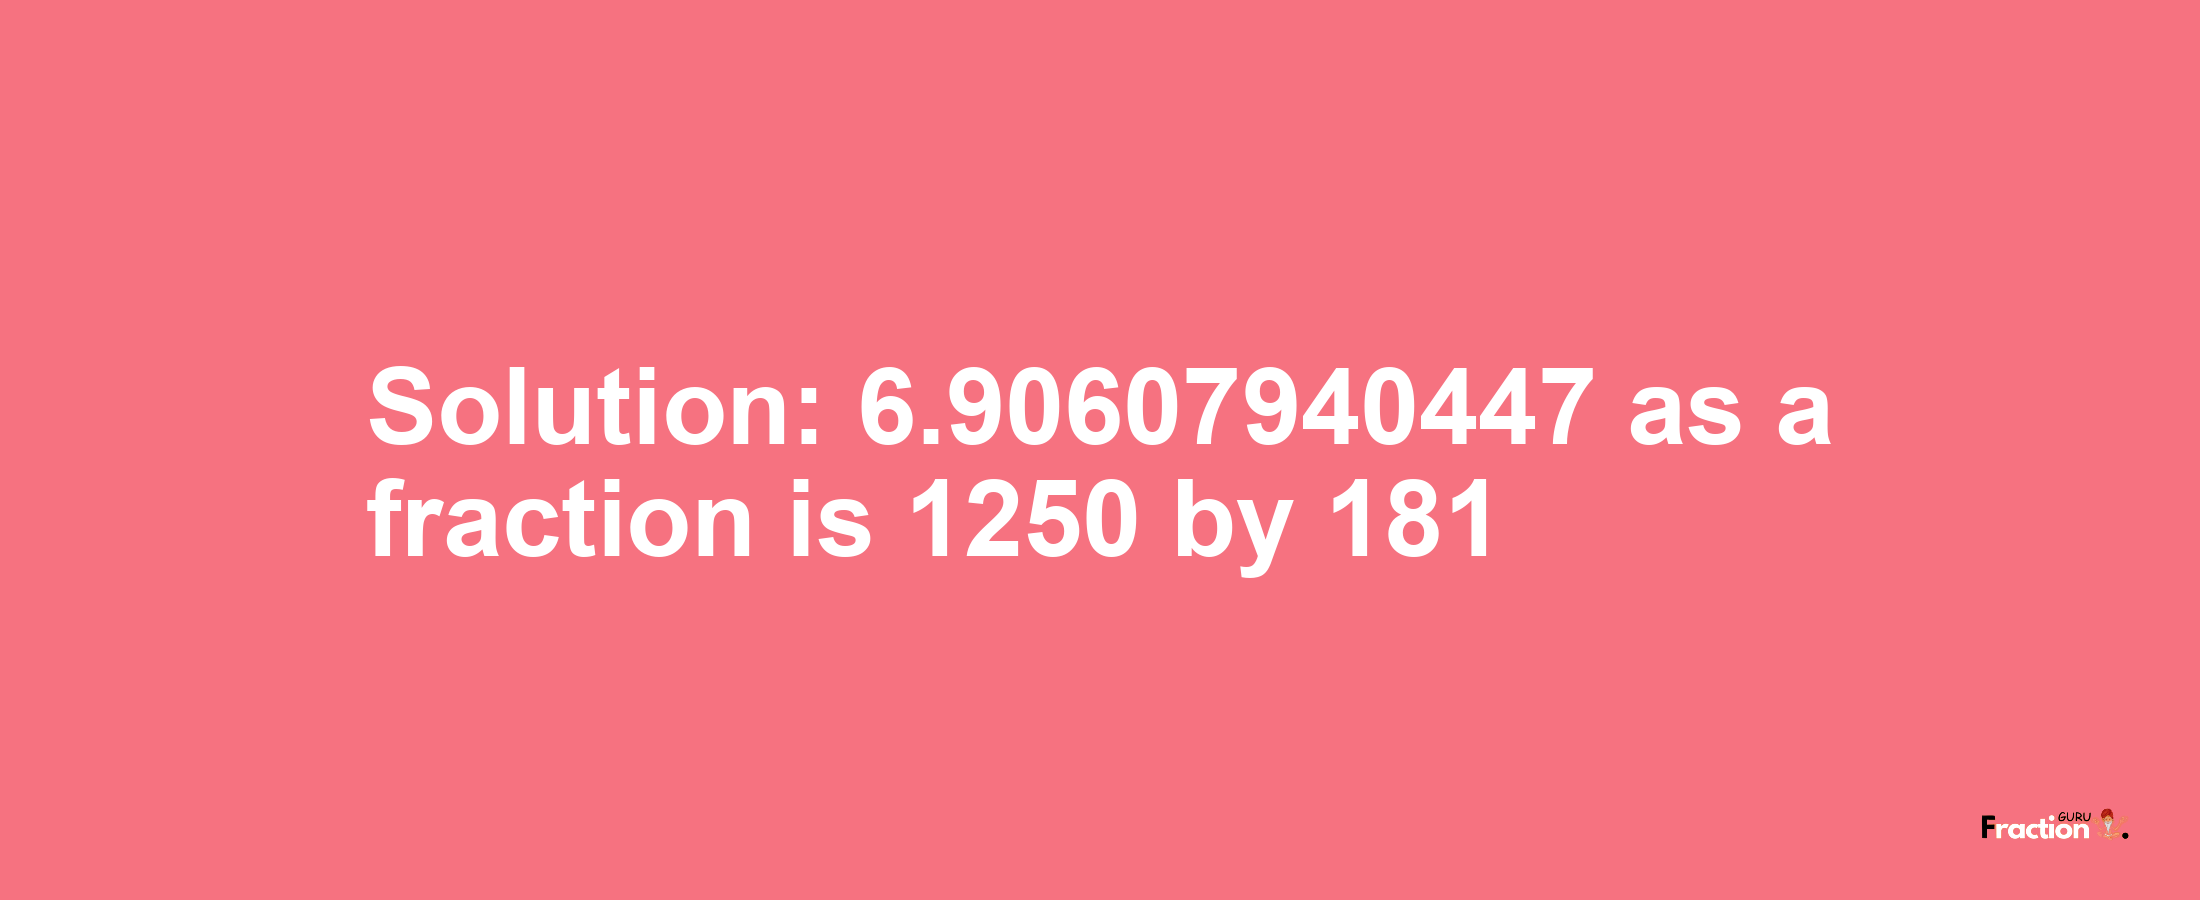 Solution:6.90607940447 as a fraction is 1250/181